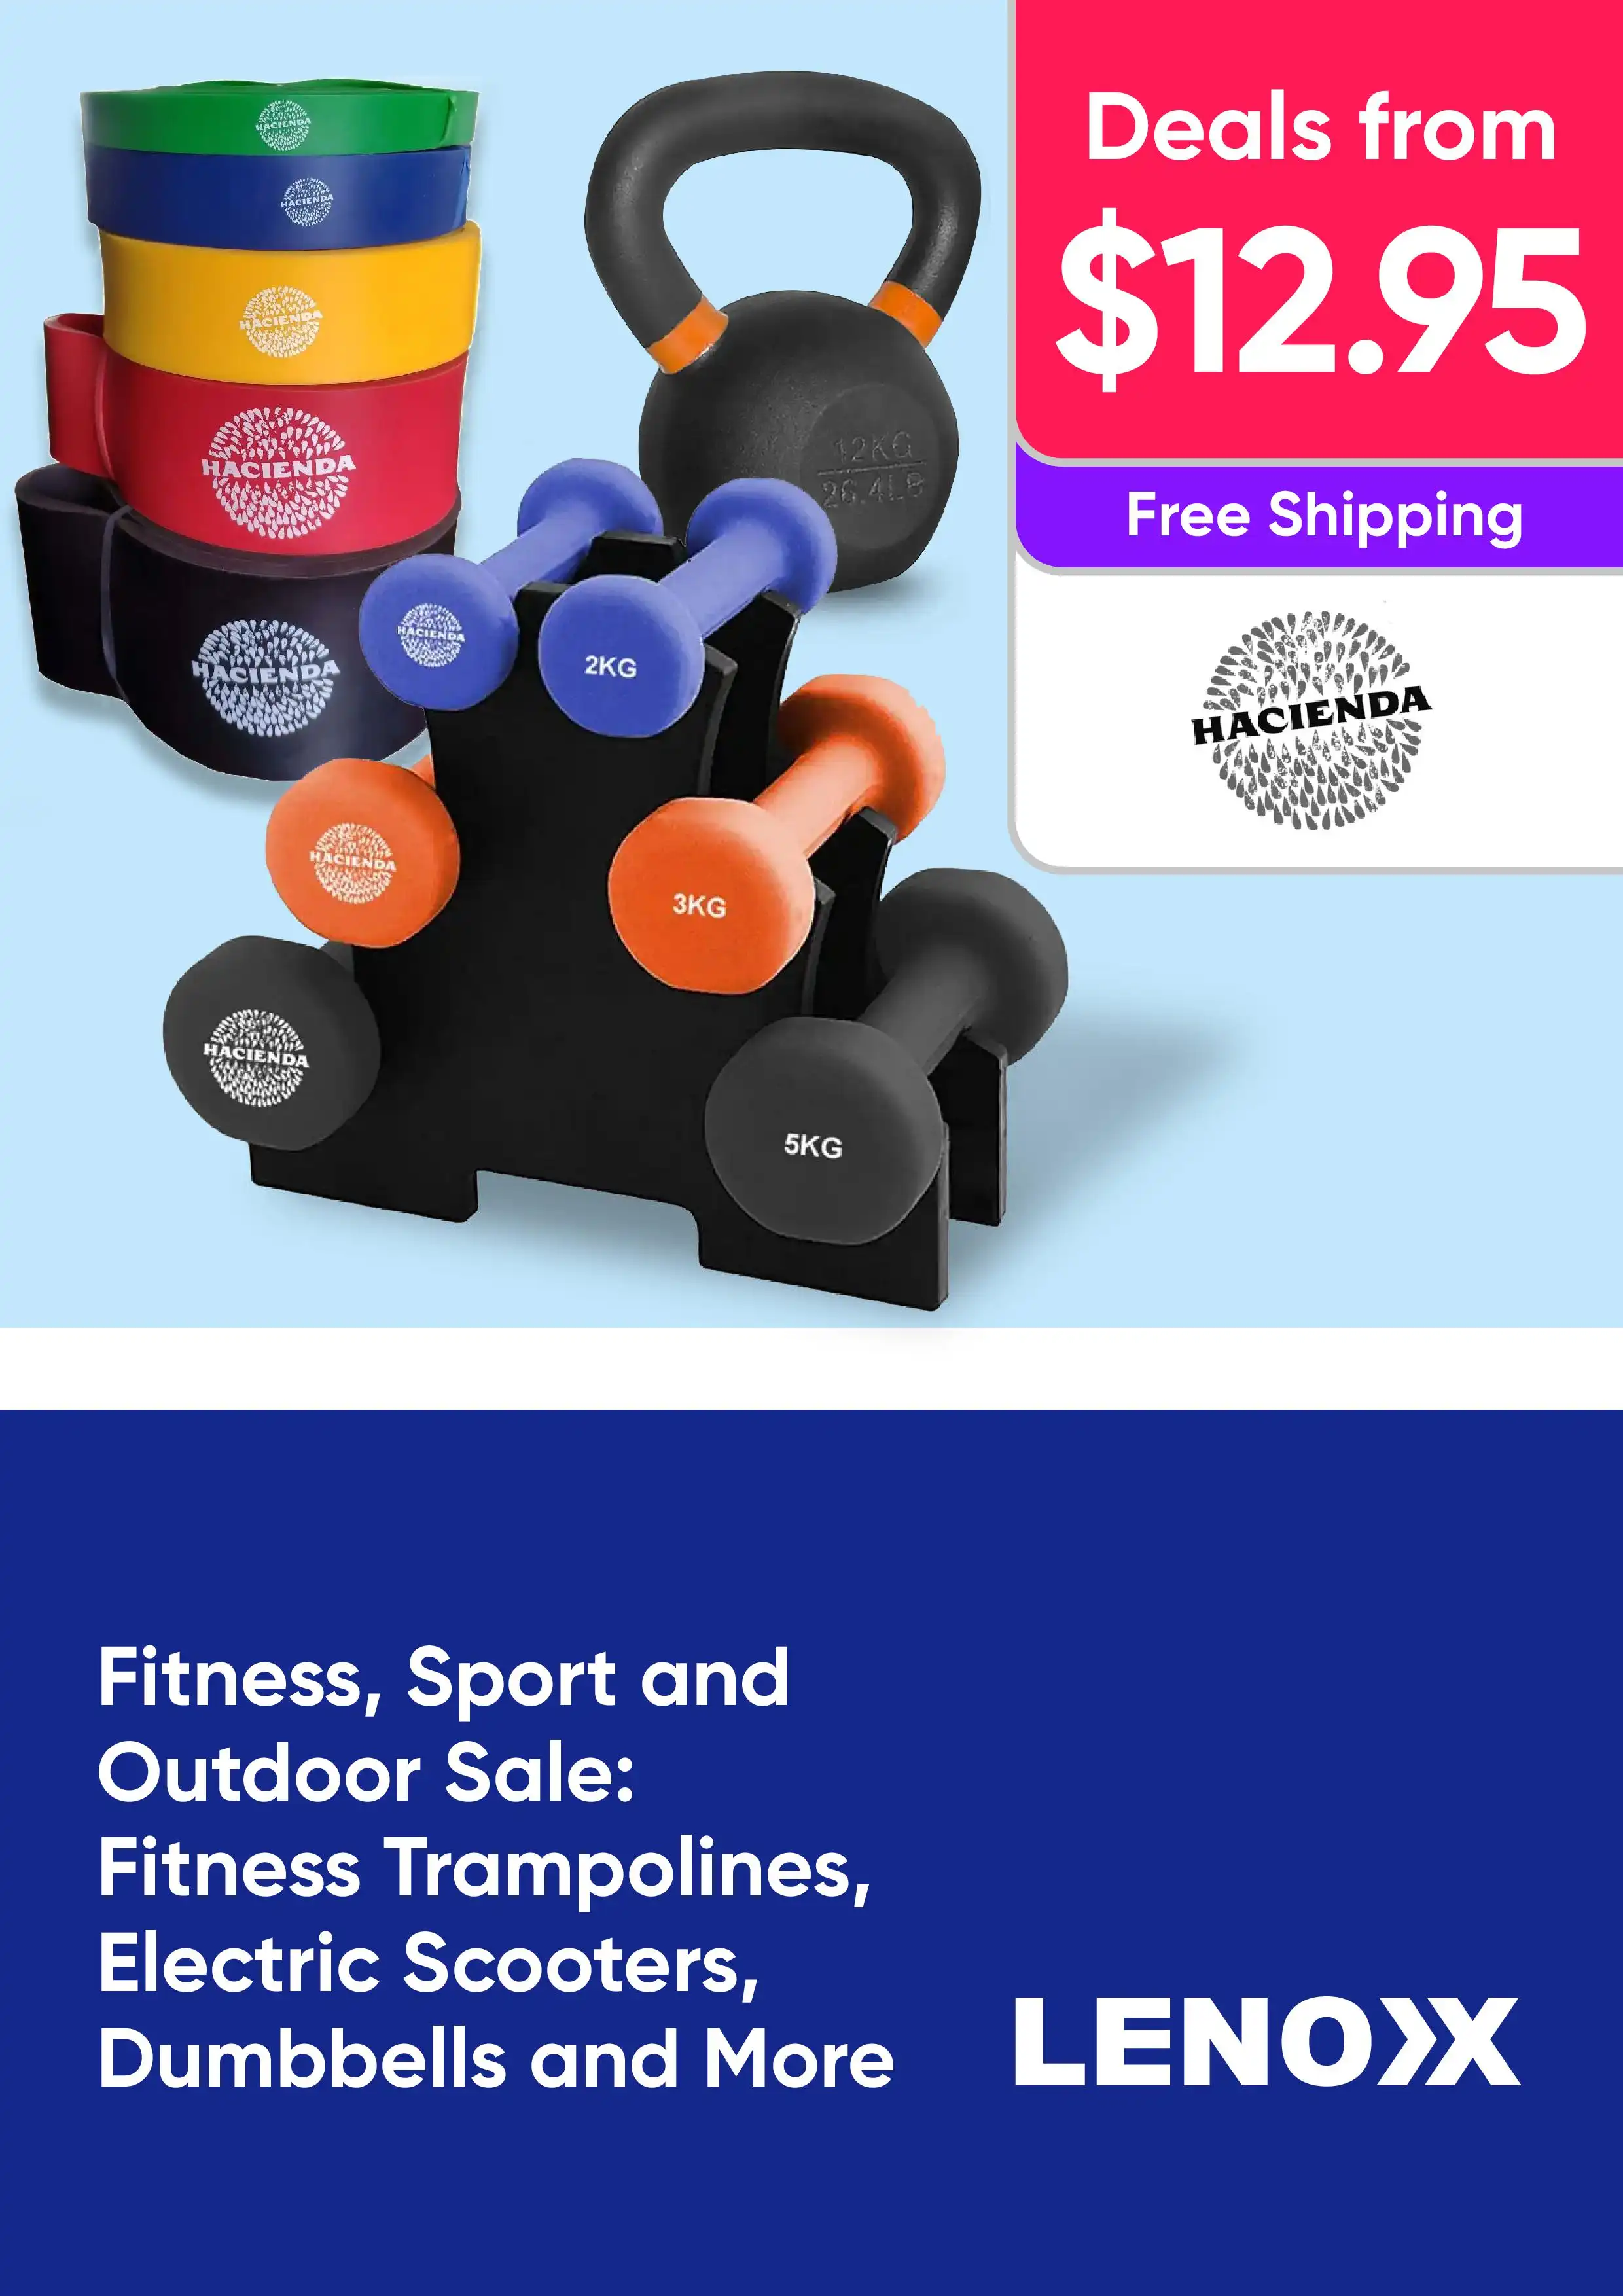 Fitness, Sport and Outdoor Sale - Fitness Trampolines, Electric Scooters, Dumbbells and More - Hacienda - deals from $12.95